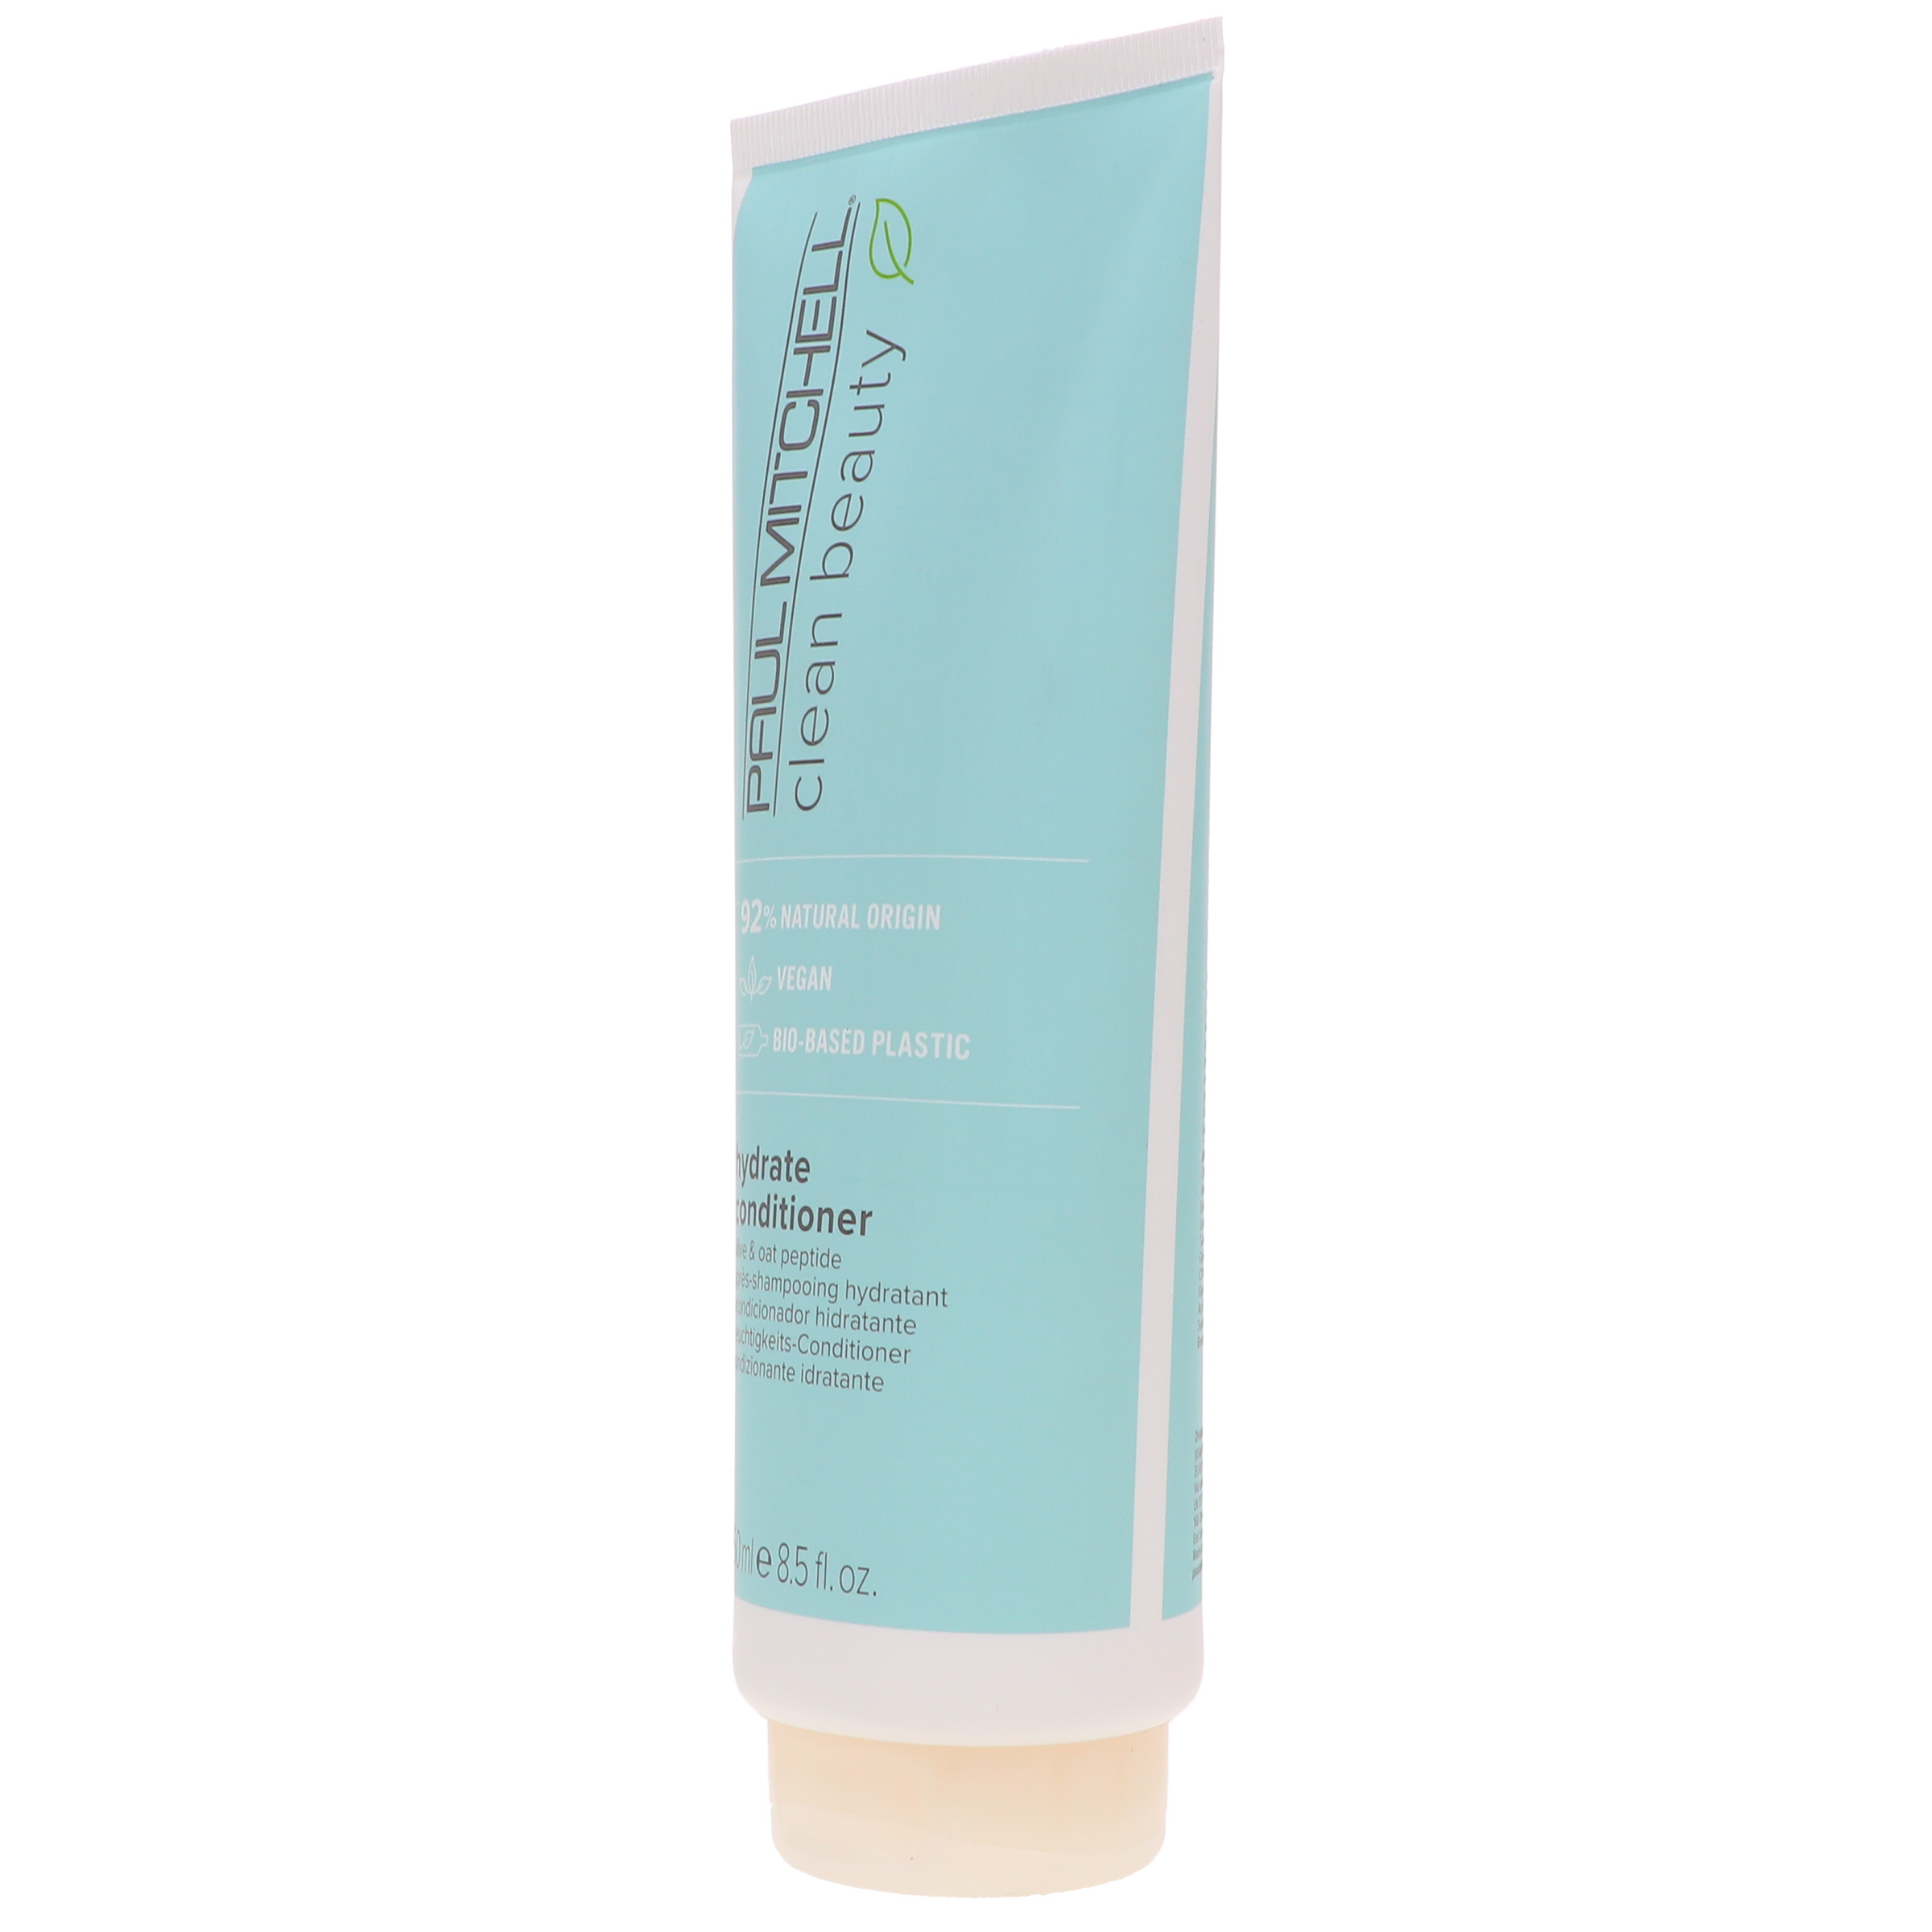 Paul Mitchell Clean Beauty Hydrate Conditioner 8.5 oz - image 2 of 8